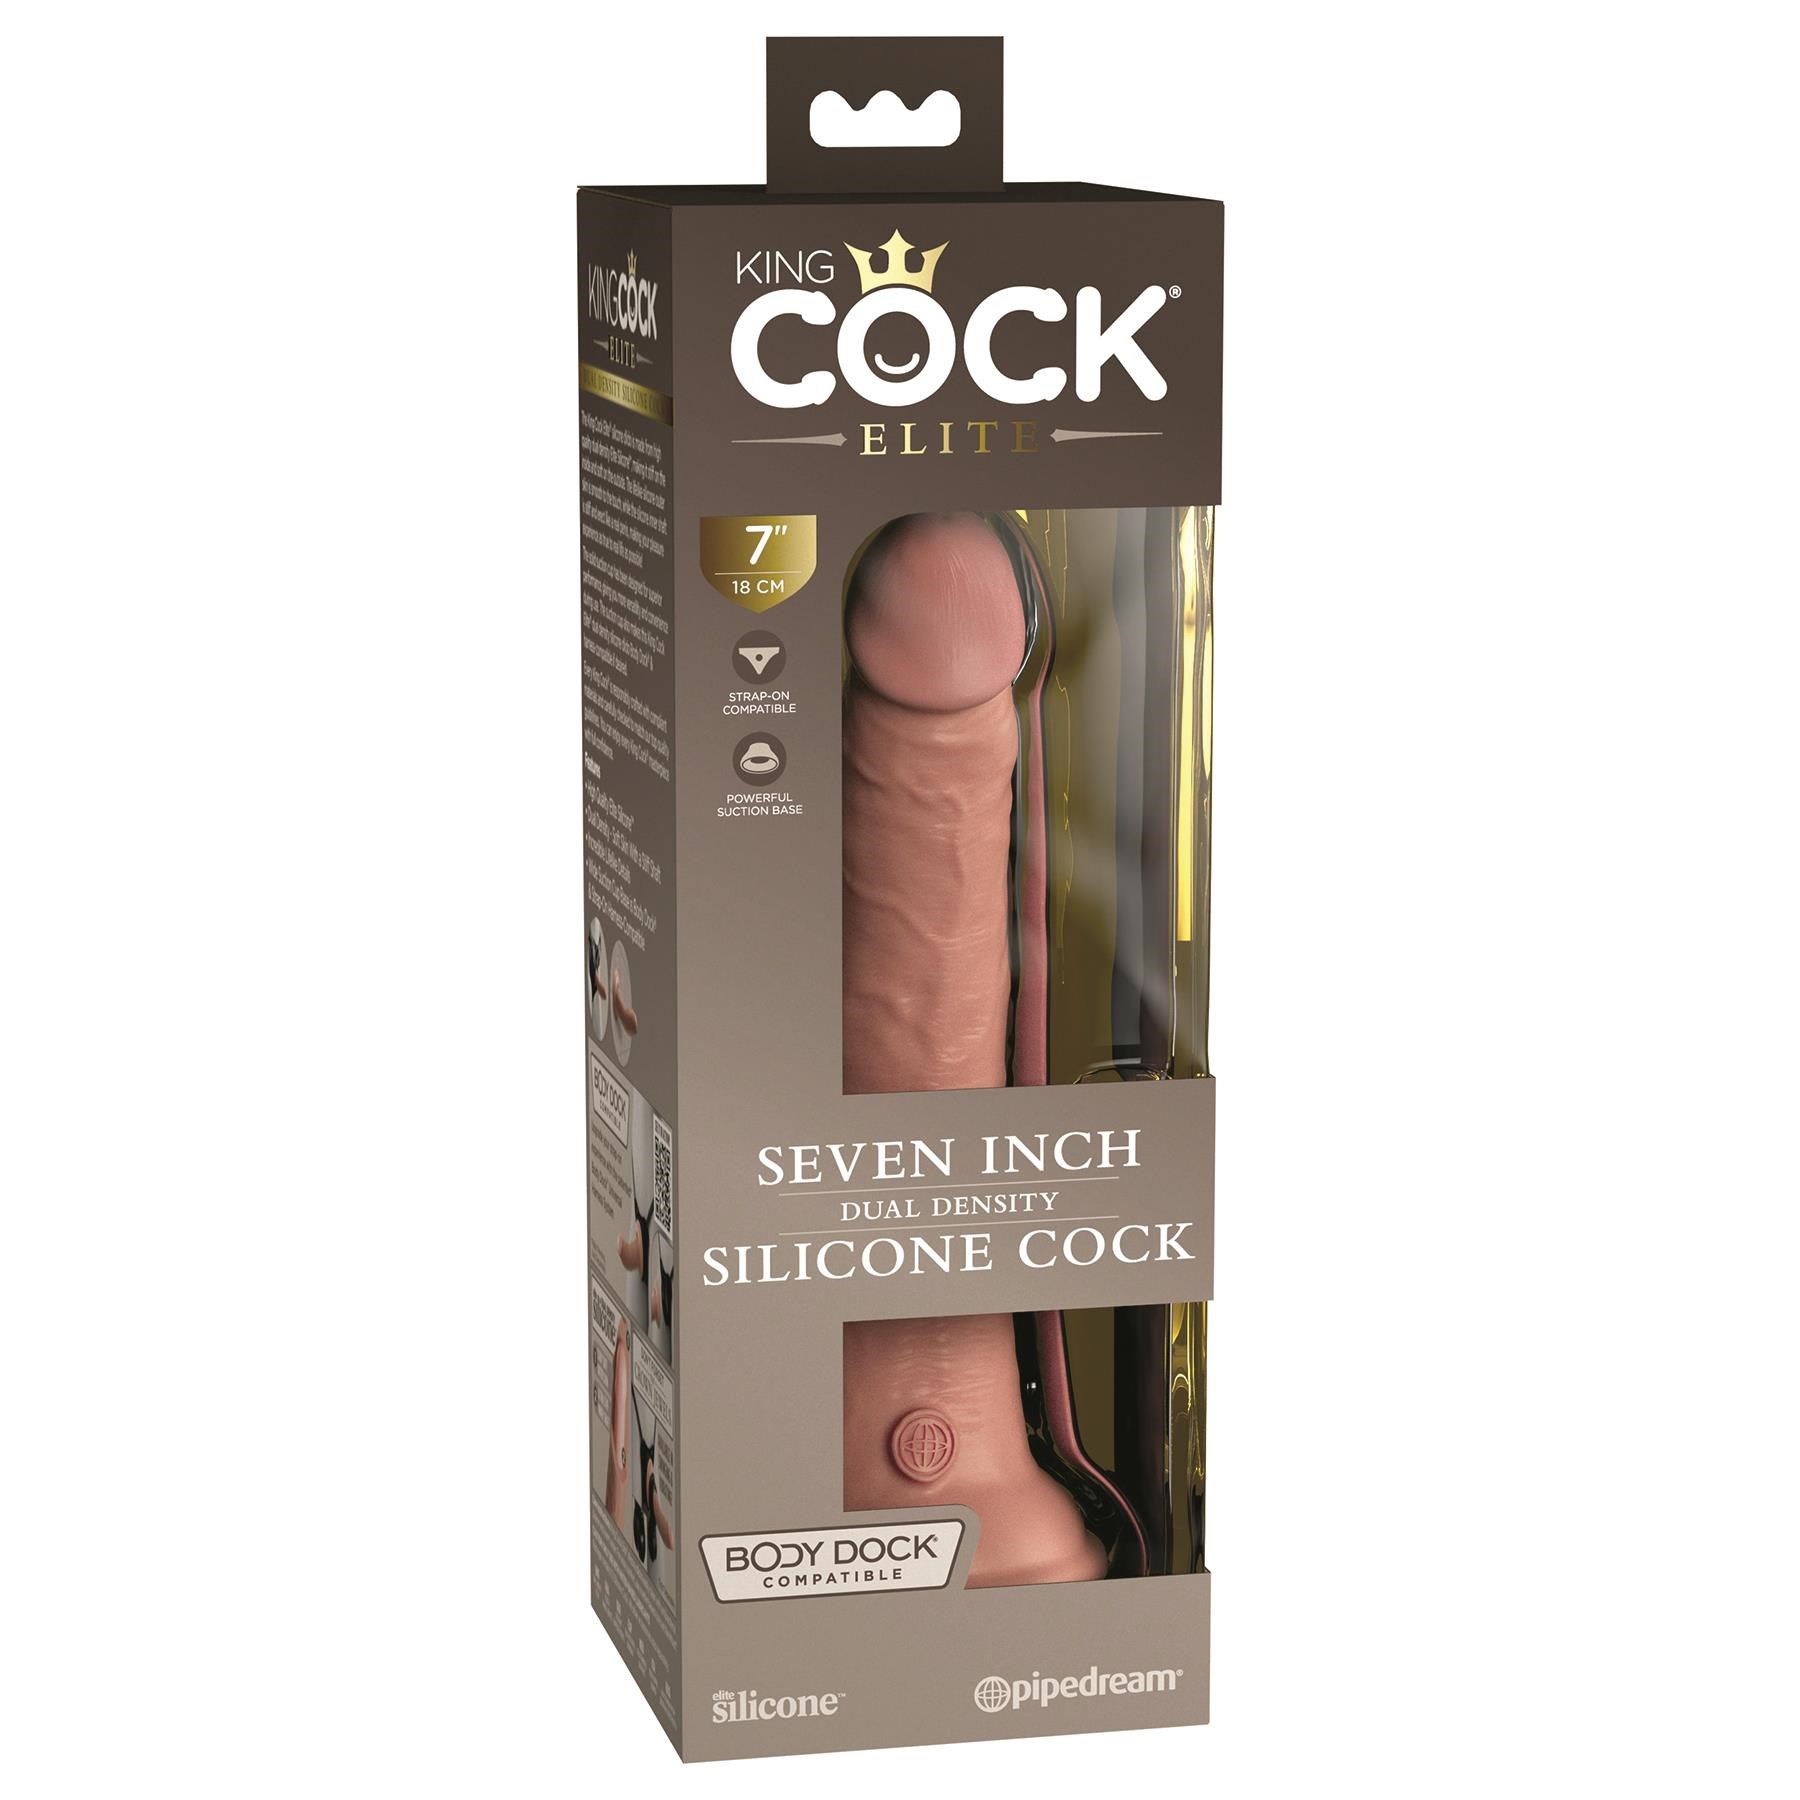 Kingcock Elite 7 Inch Dual Density Silicone Dildo - Packaging #1